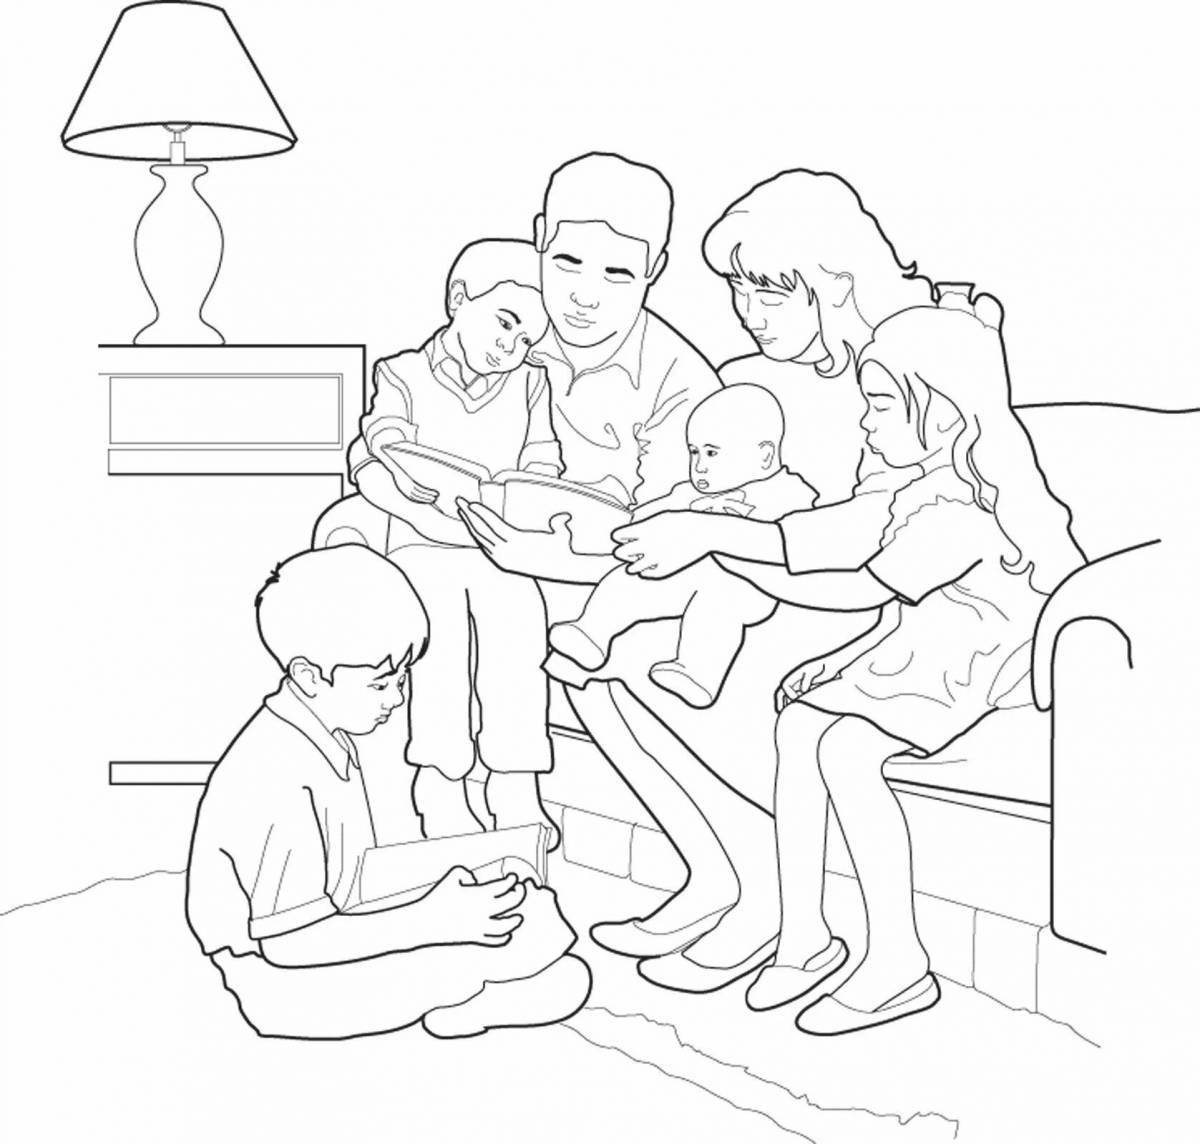 Fabulous family coloring book for kids